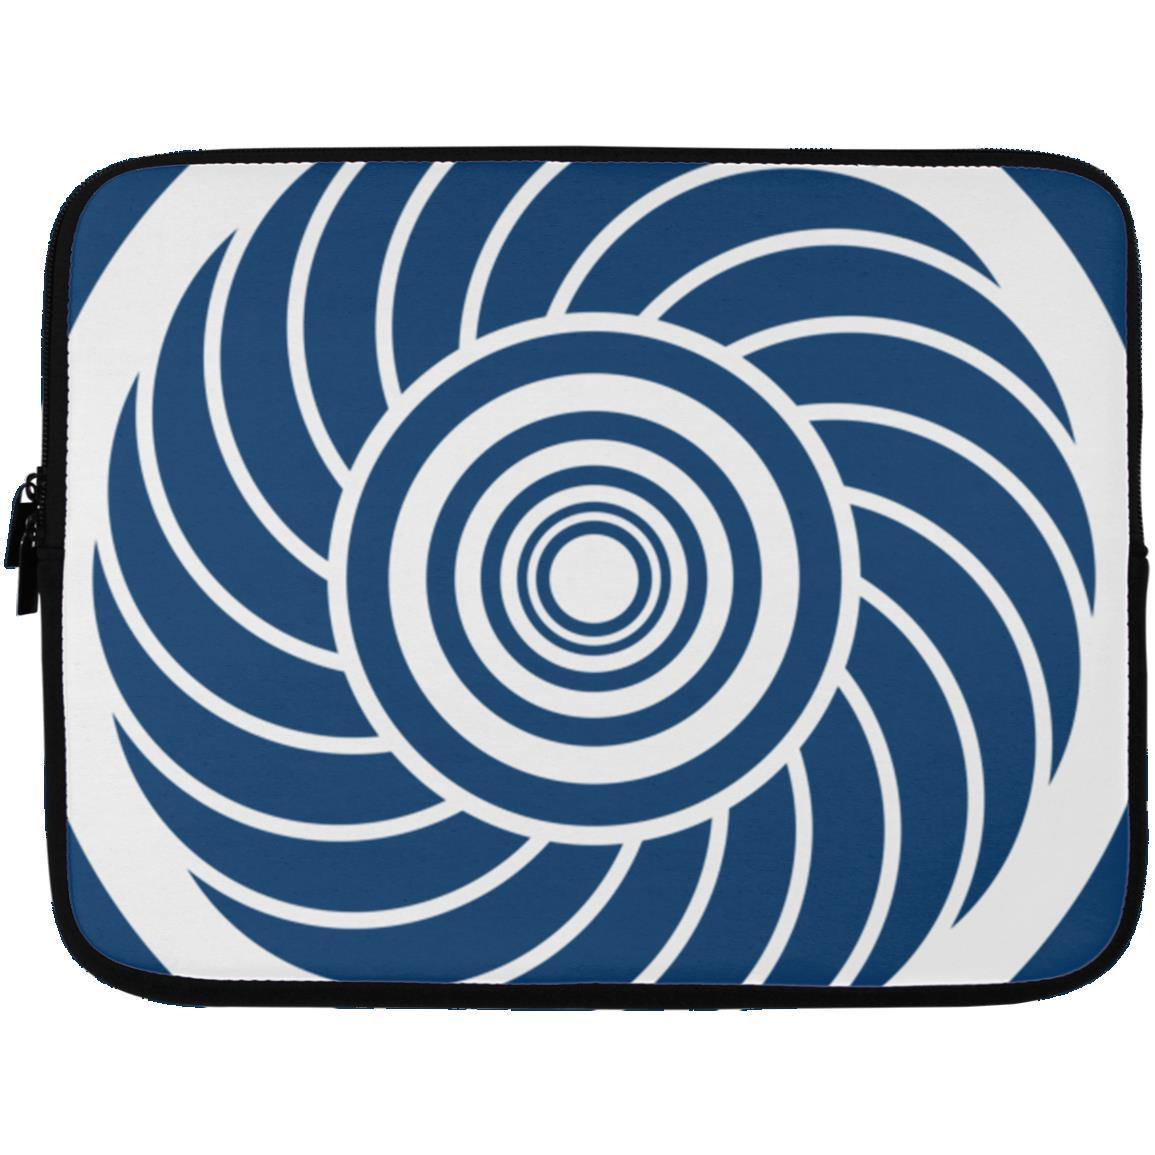 Crop Circle Laptop Sleeve - Roundway Hill - Shapes of Wisdom